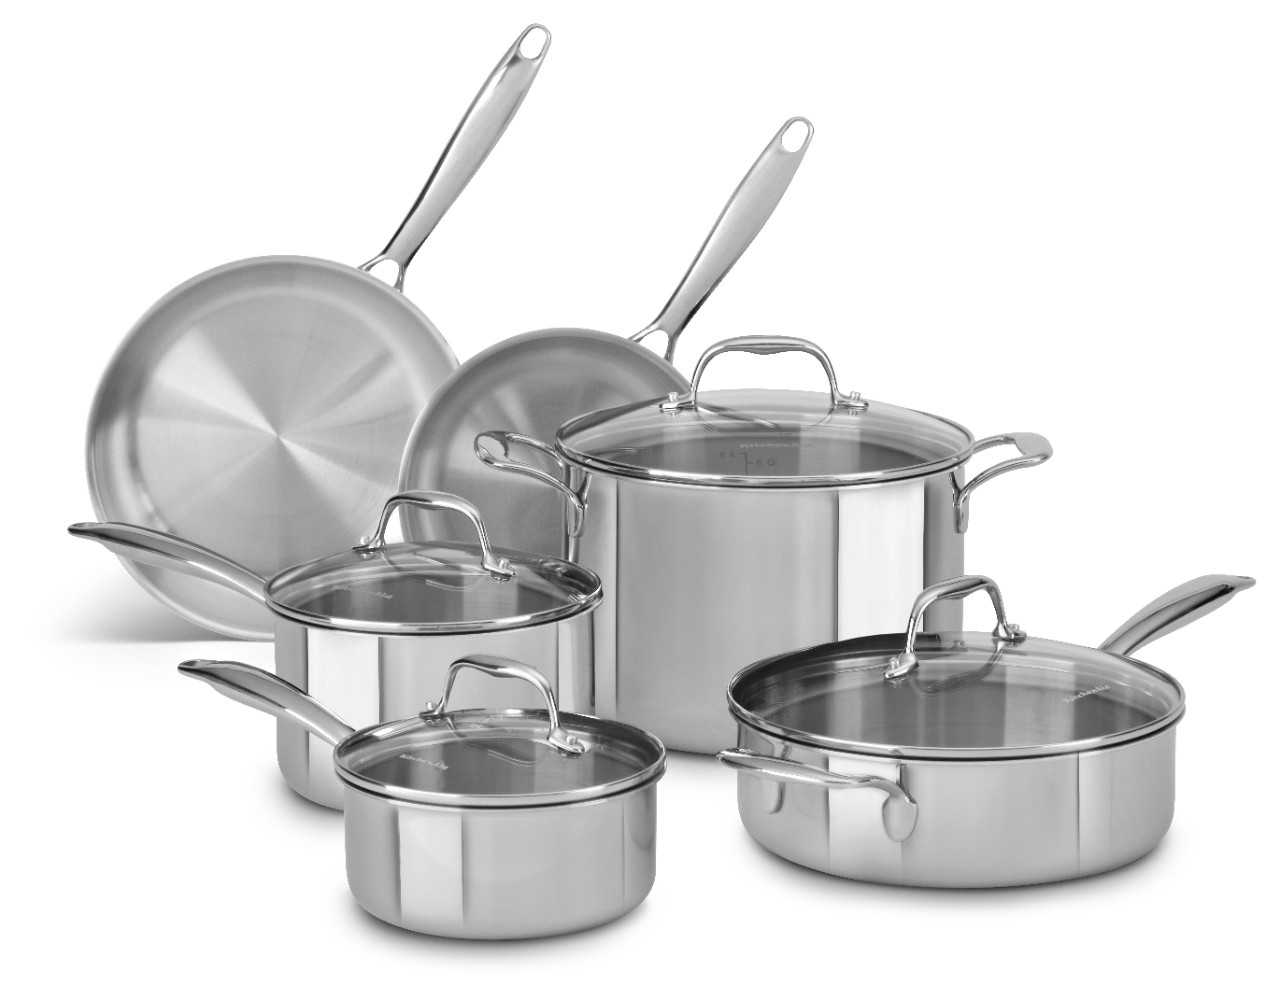 Receive a free 10-piece KitchenAid® Cookware Set today